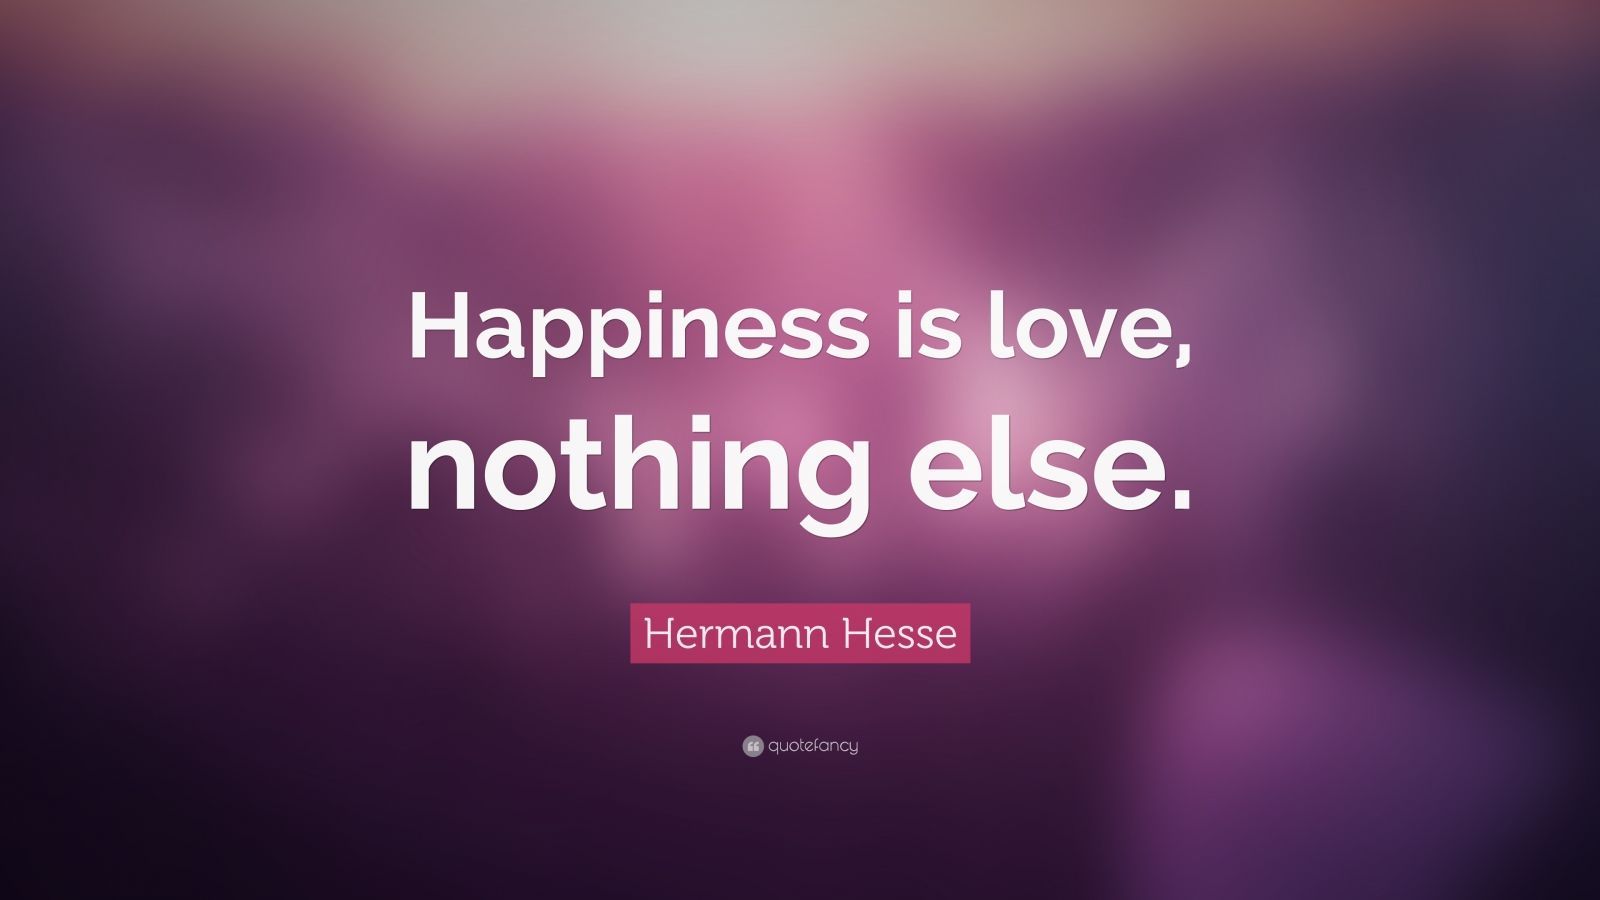 Hermann Hesse Quote: “Happiness is love, nothing else.” (12 wallpapers ...